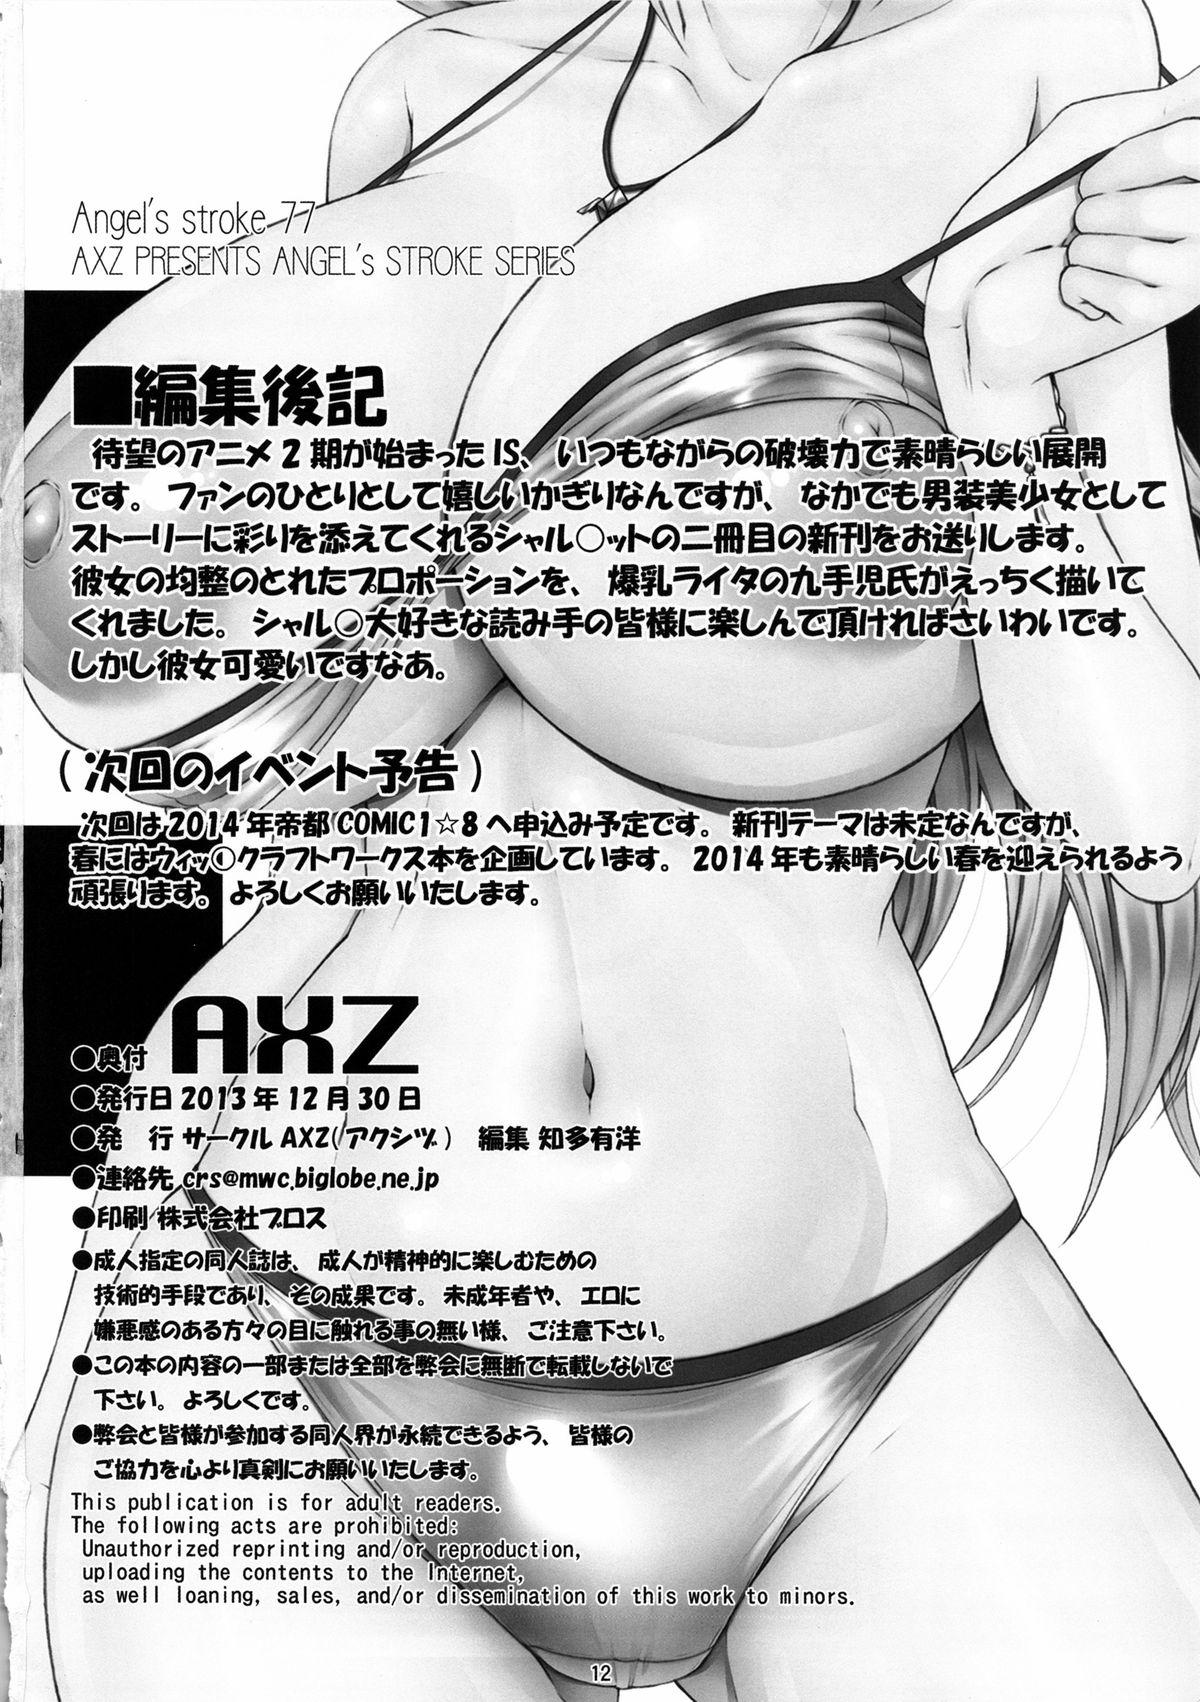 Sex Pussy Angel's Stroke 77 Infinite Charlotte! - Infinite stratos Rubbing - Page 13